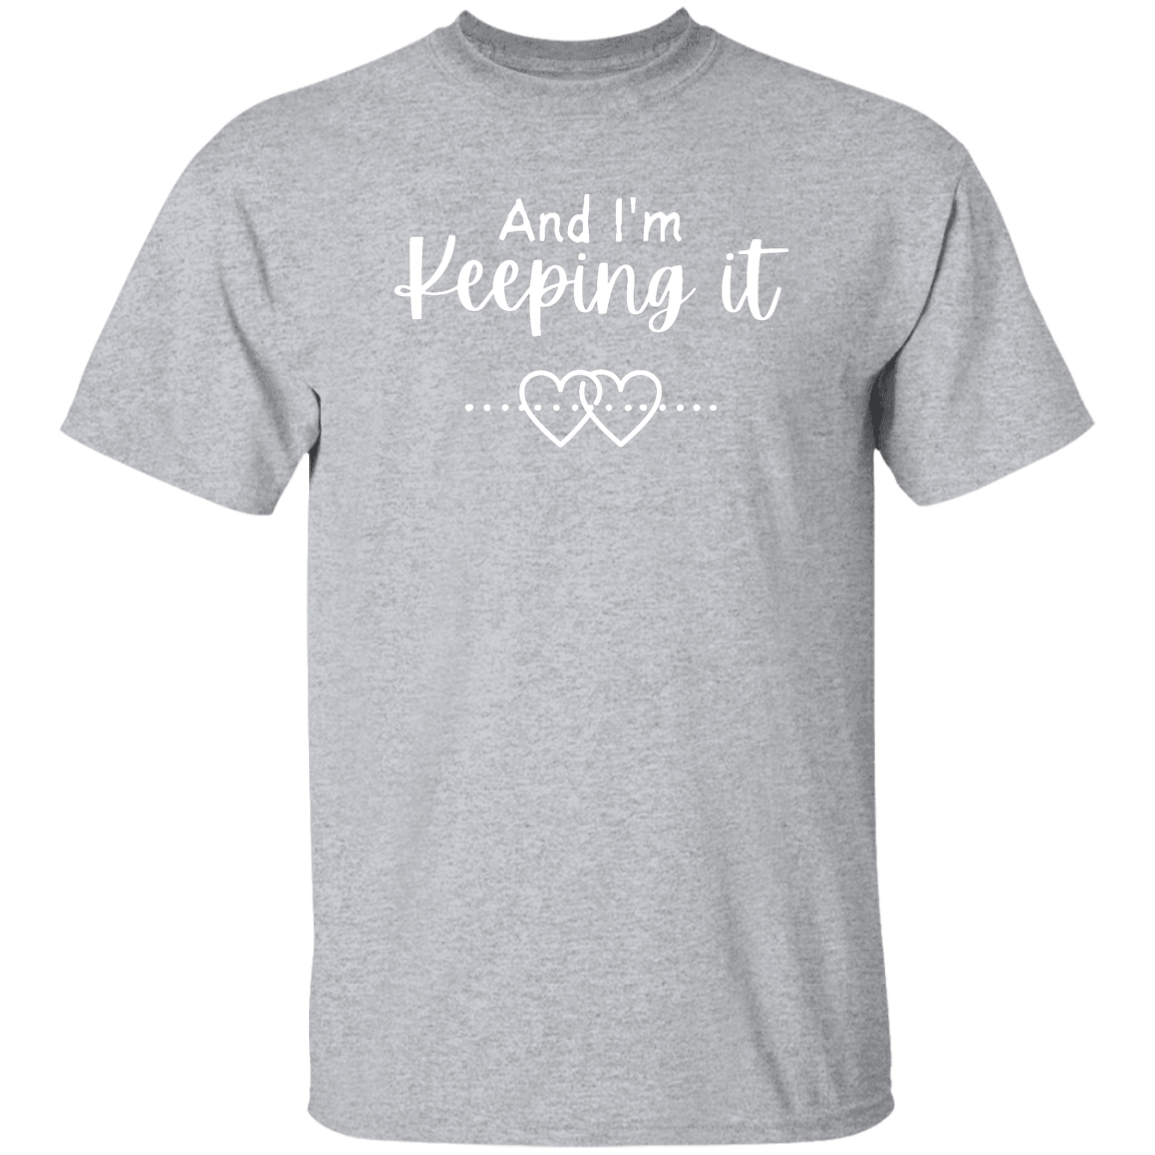 And I'm Keeping it! Tee White writing